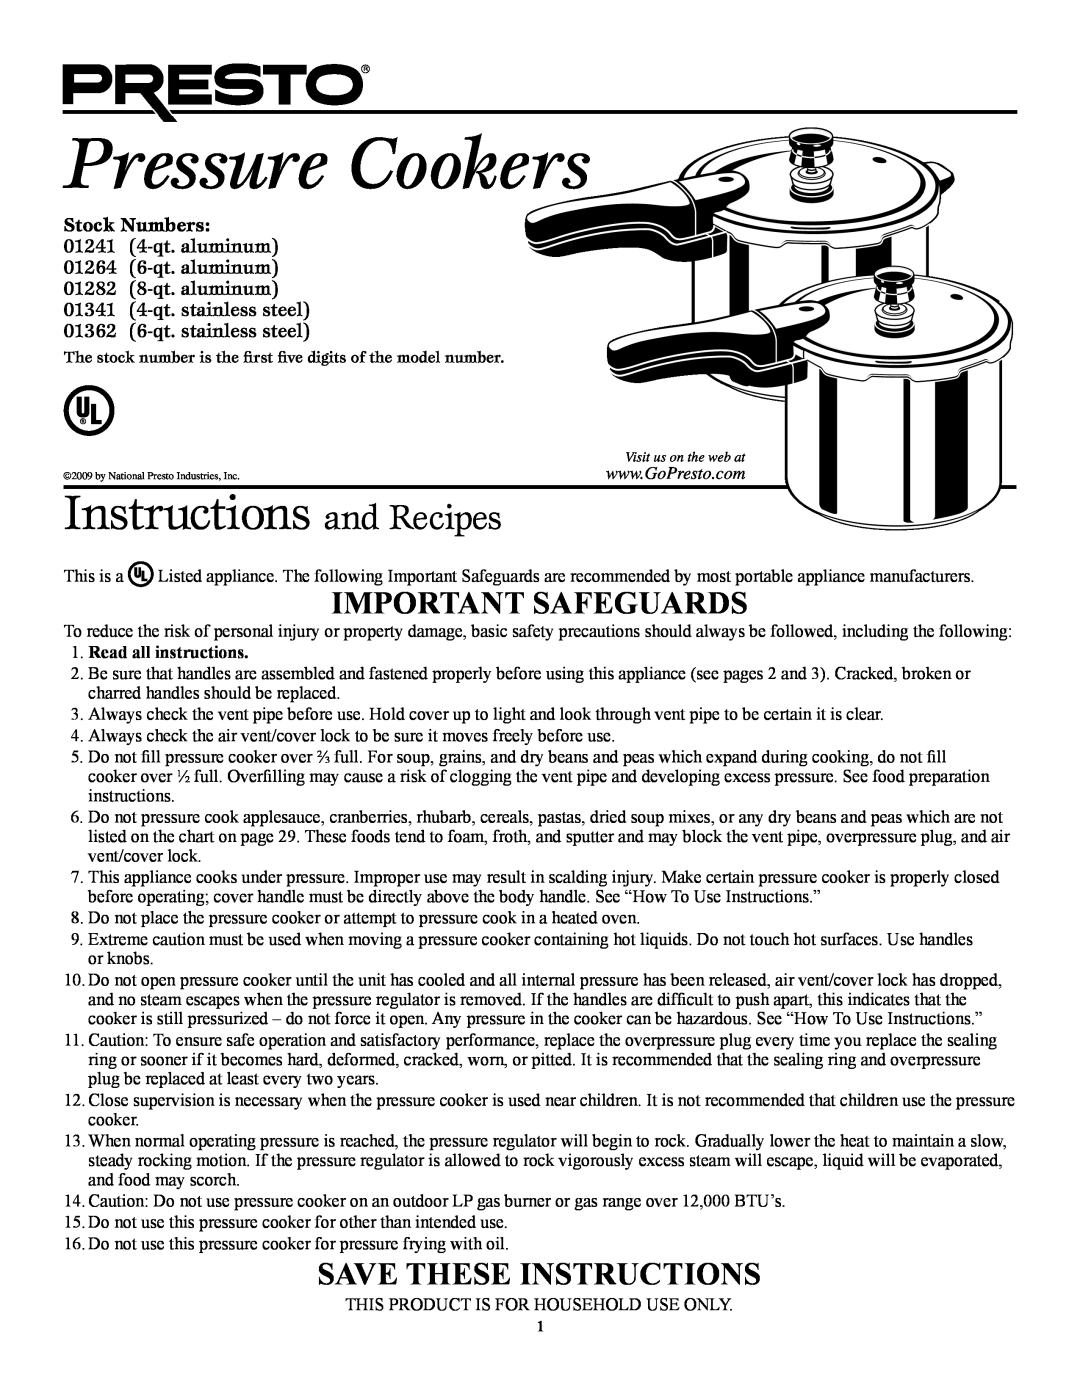 Presto 1241, 1282, 1362, 1264, 1341 manual Stock Numbers, Pressure Cookers, Instructions and Recipes, Important Safeguards 